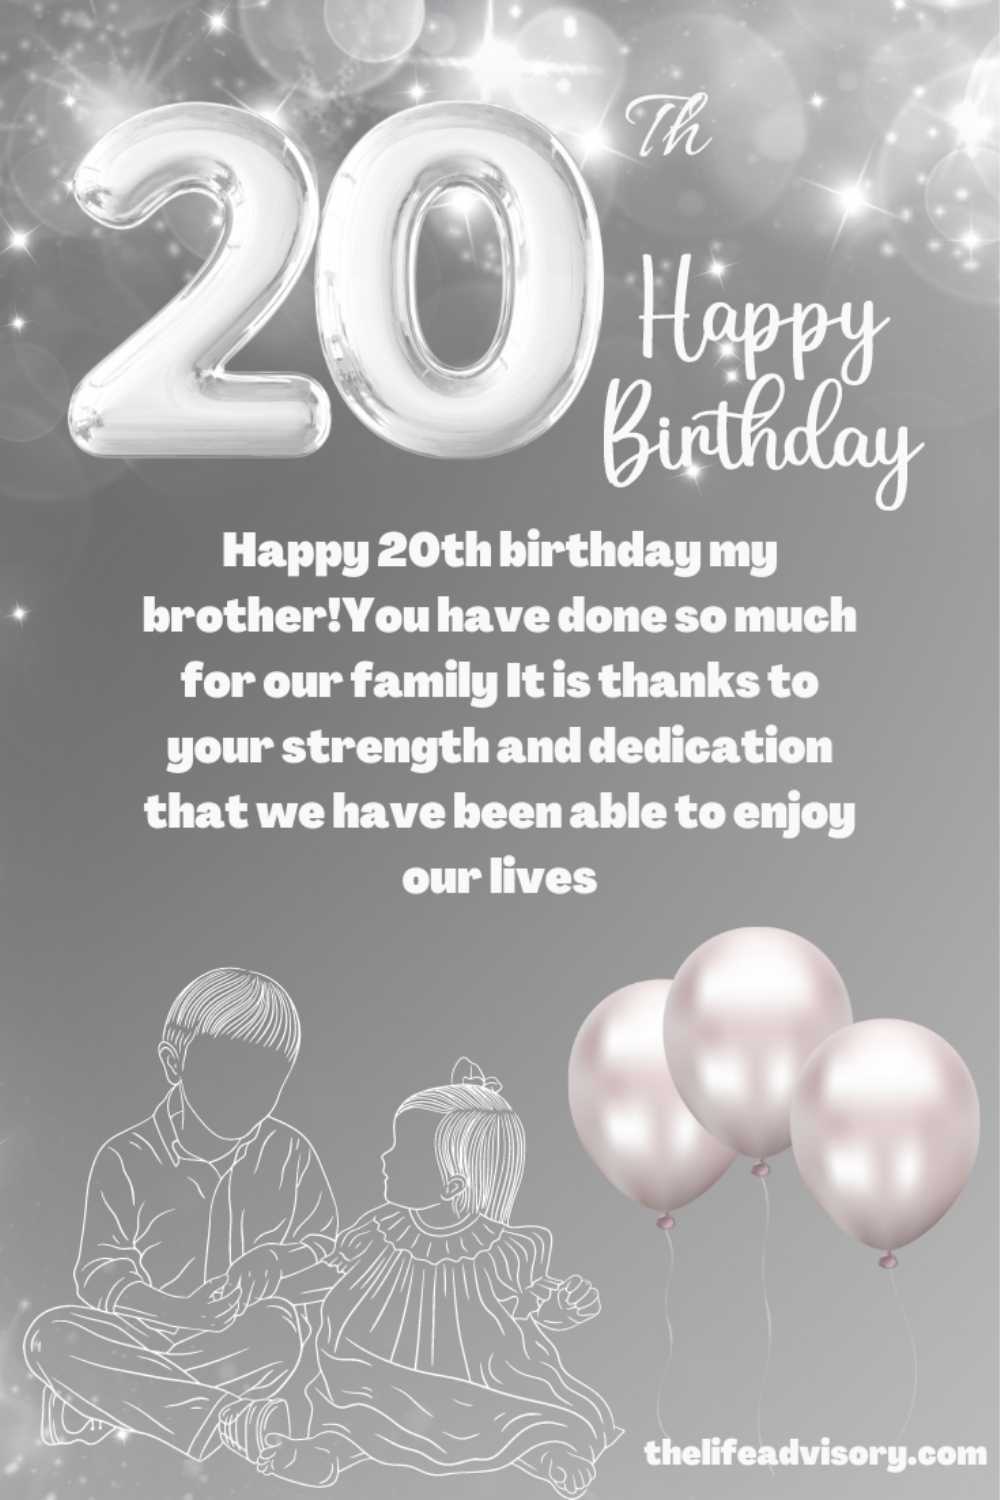 Happy 20th Birthday Wishes, Messages for Brother - The life Advisory